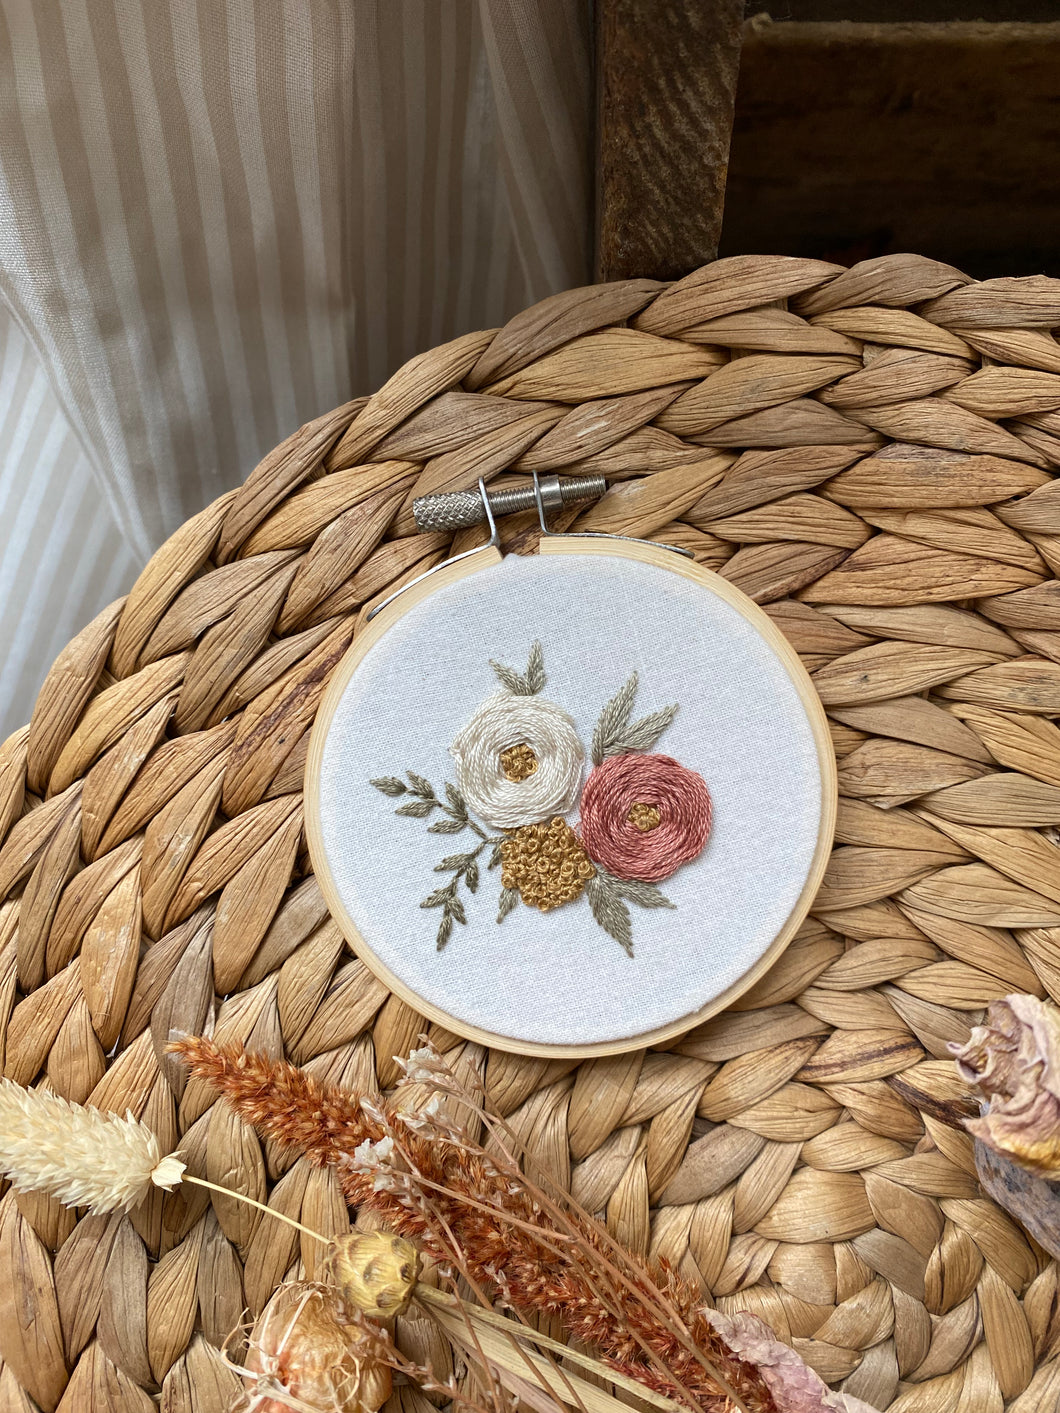 The Edith, finished floral hoop